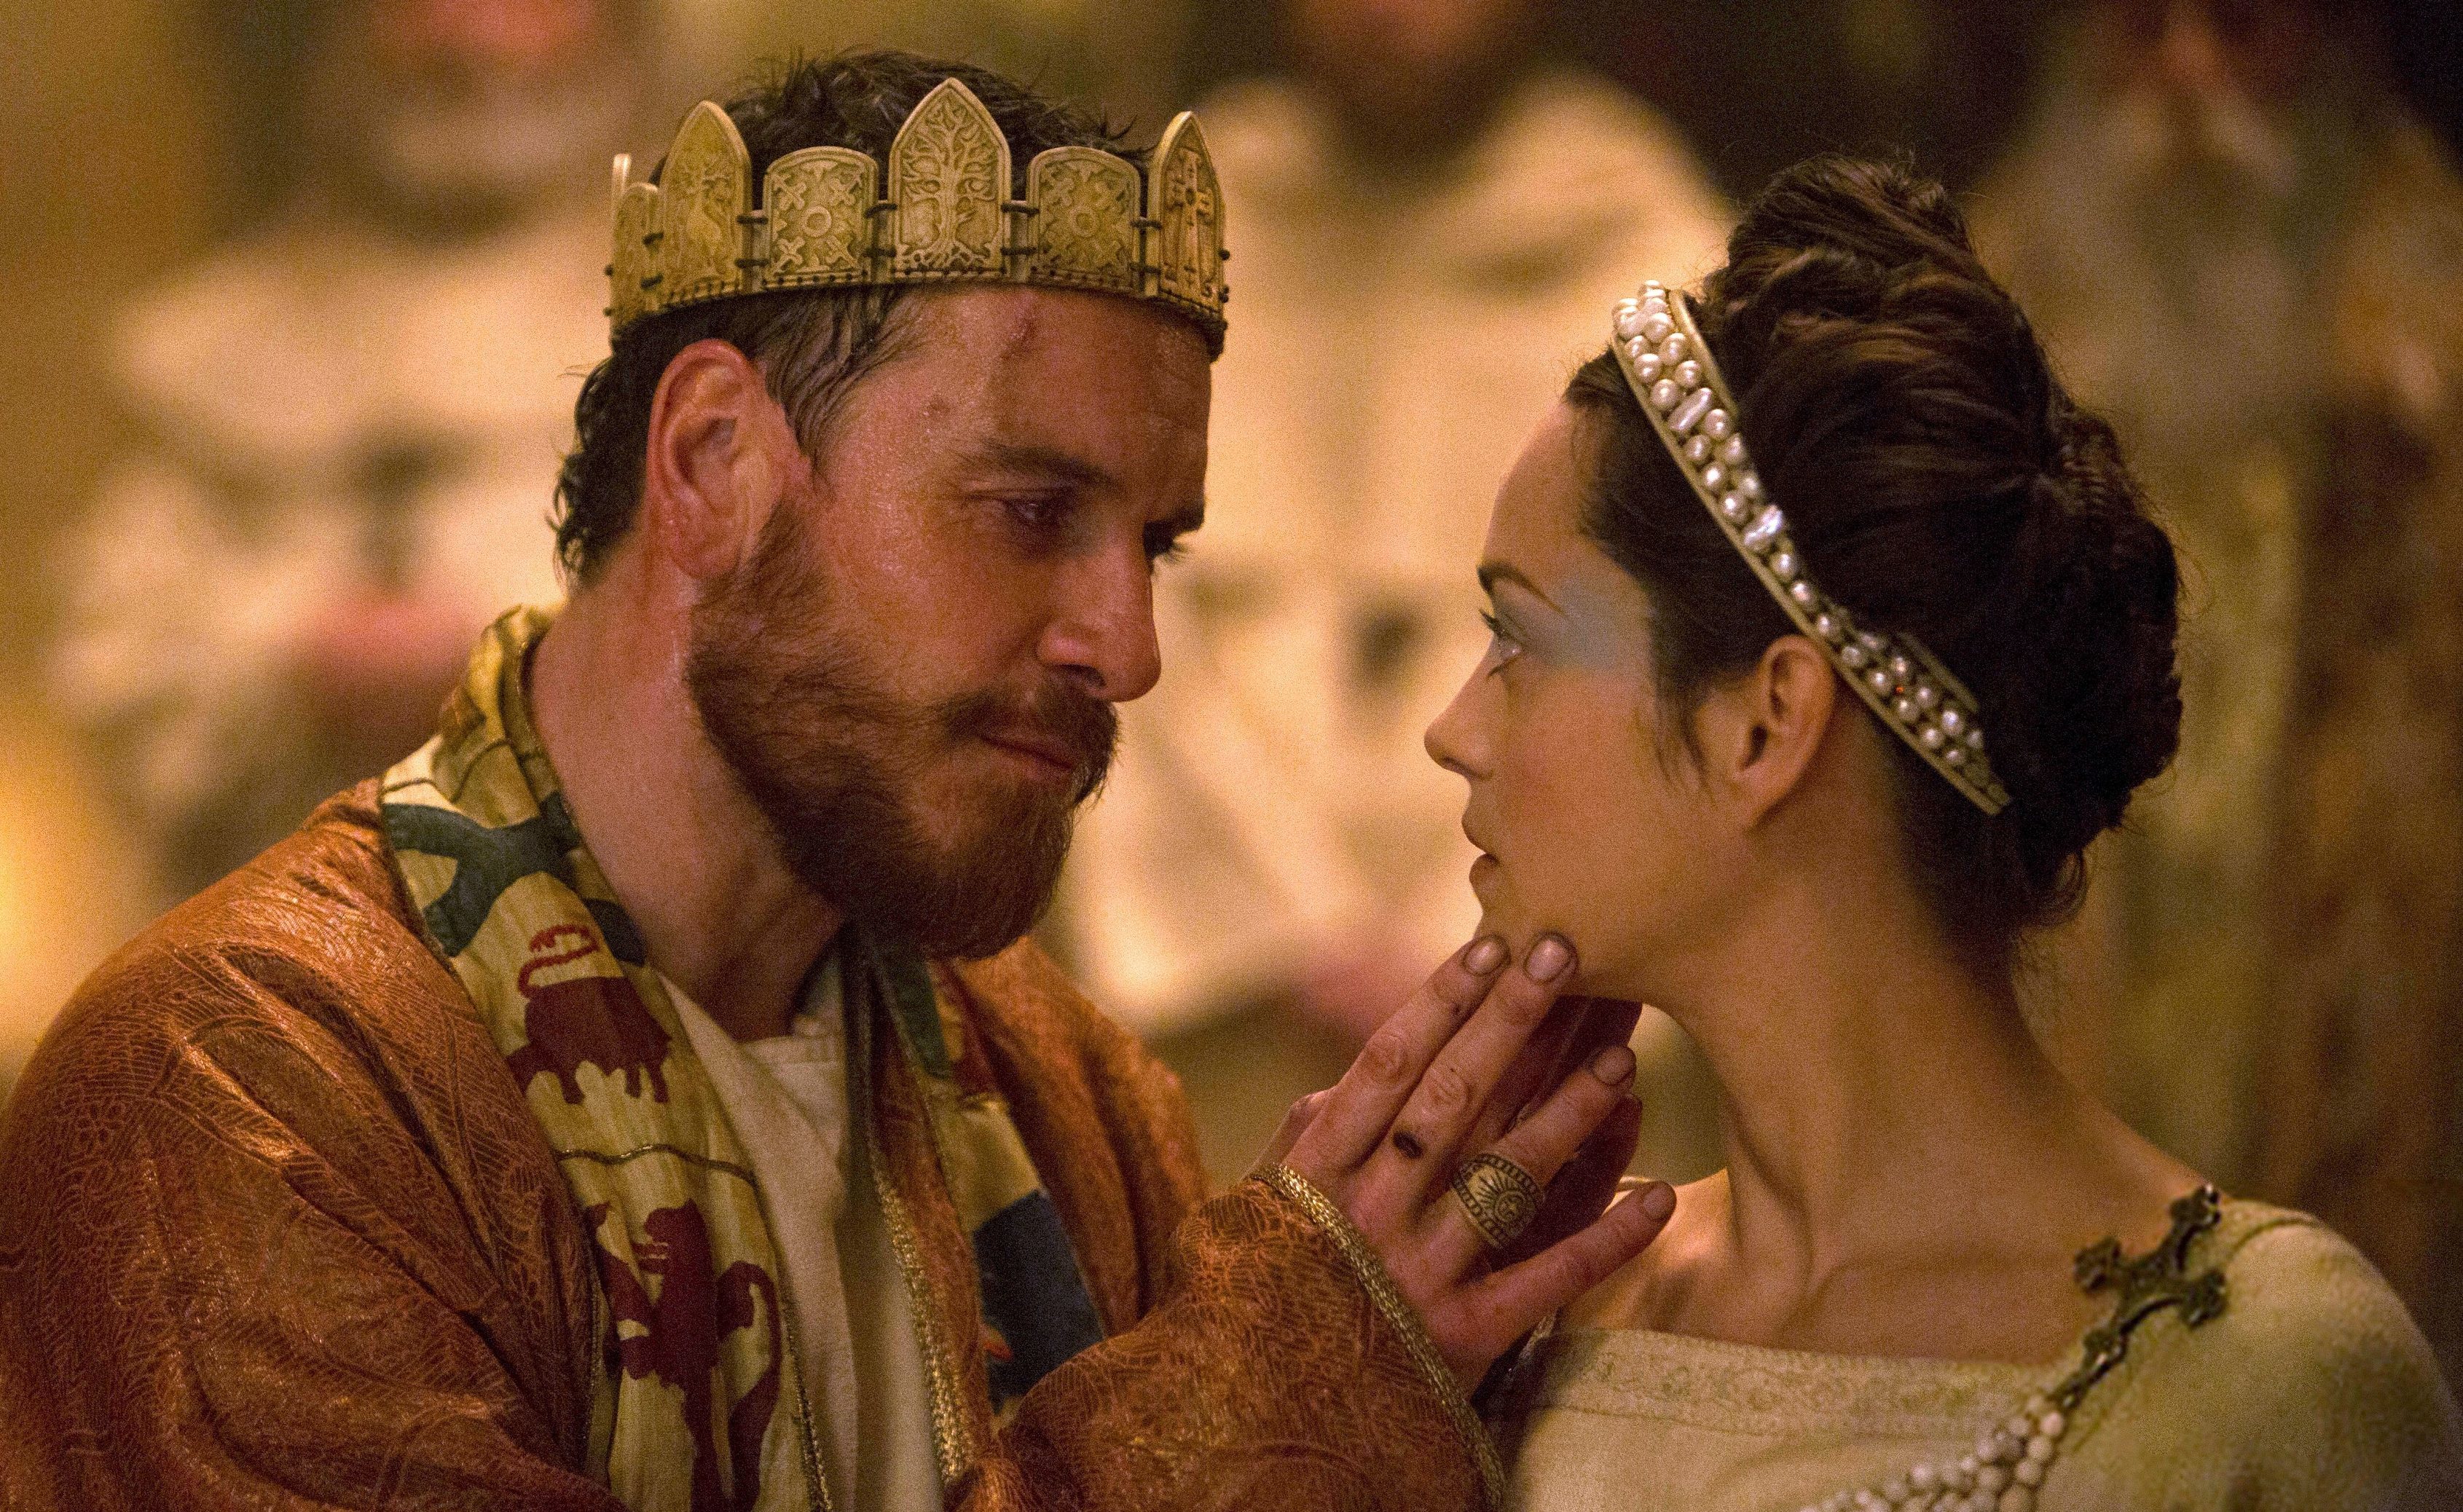 Michael Fassbender and Marion Cotillard in the 2015 film adaptation of Macbeth.